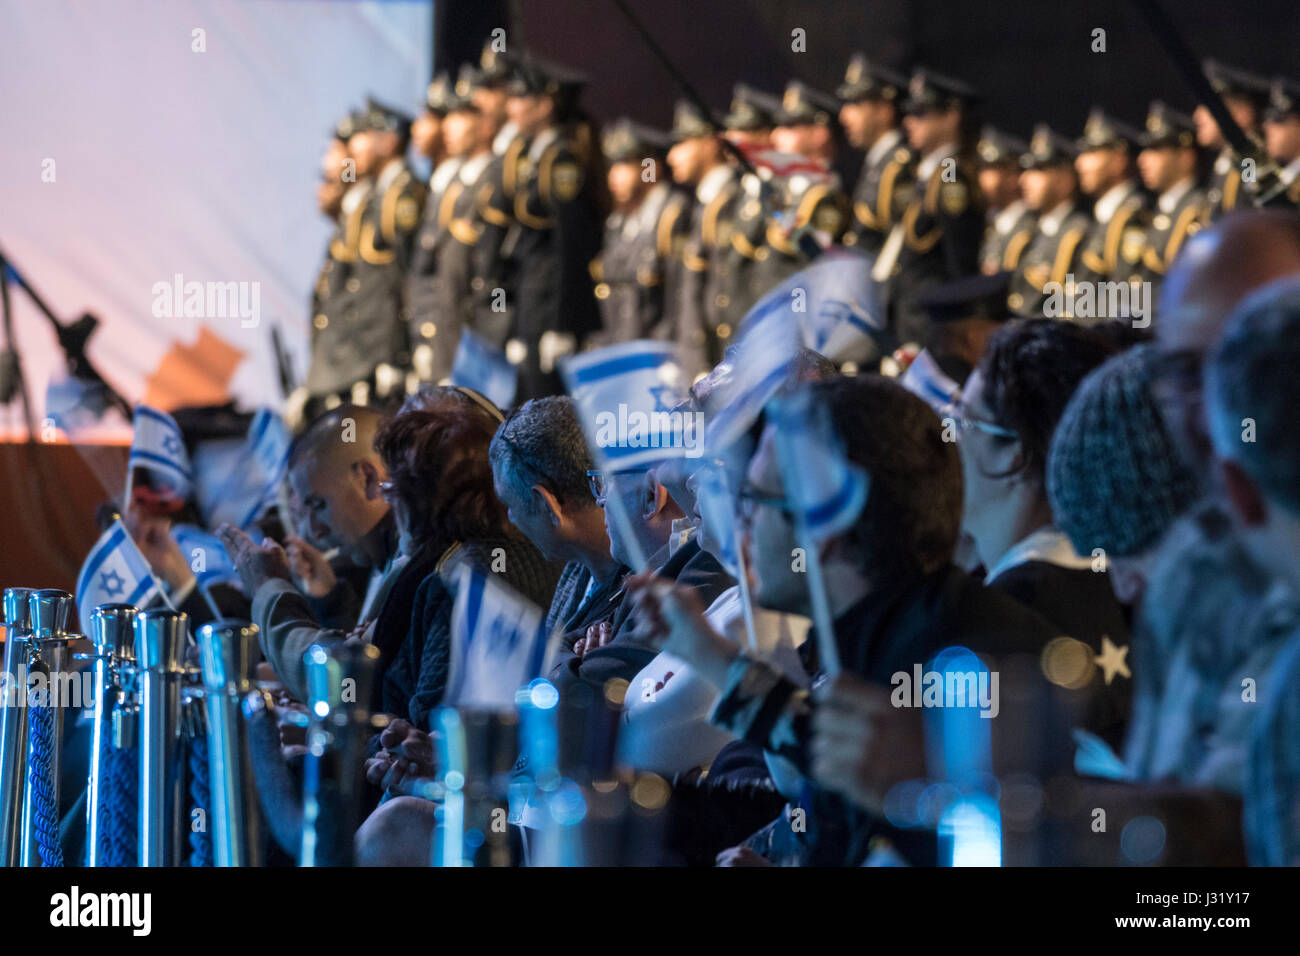 Jerusalem, Israel. 01st May, 2017. Israel's 69th independence day ceremony, mount Hertzl, Jerusalem. People waving Israeli flags while the security guard of the Knesset, the Israeli parliament, forms a guard of honor in the background. Credit: Yagil Henkin/Alamy Live News Stock Photo